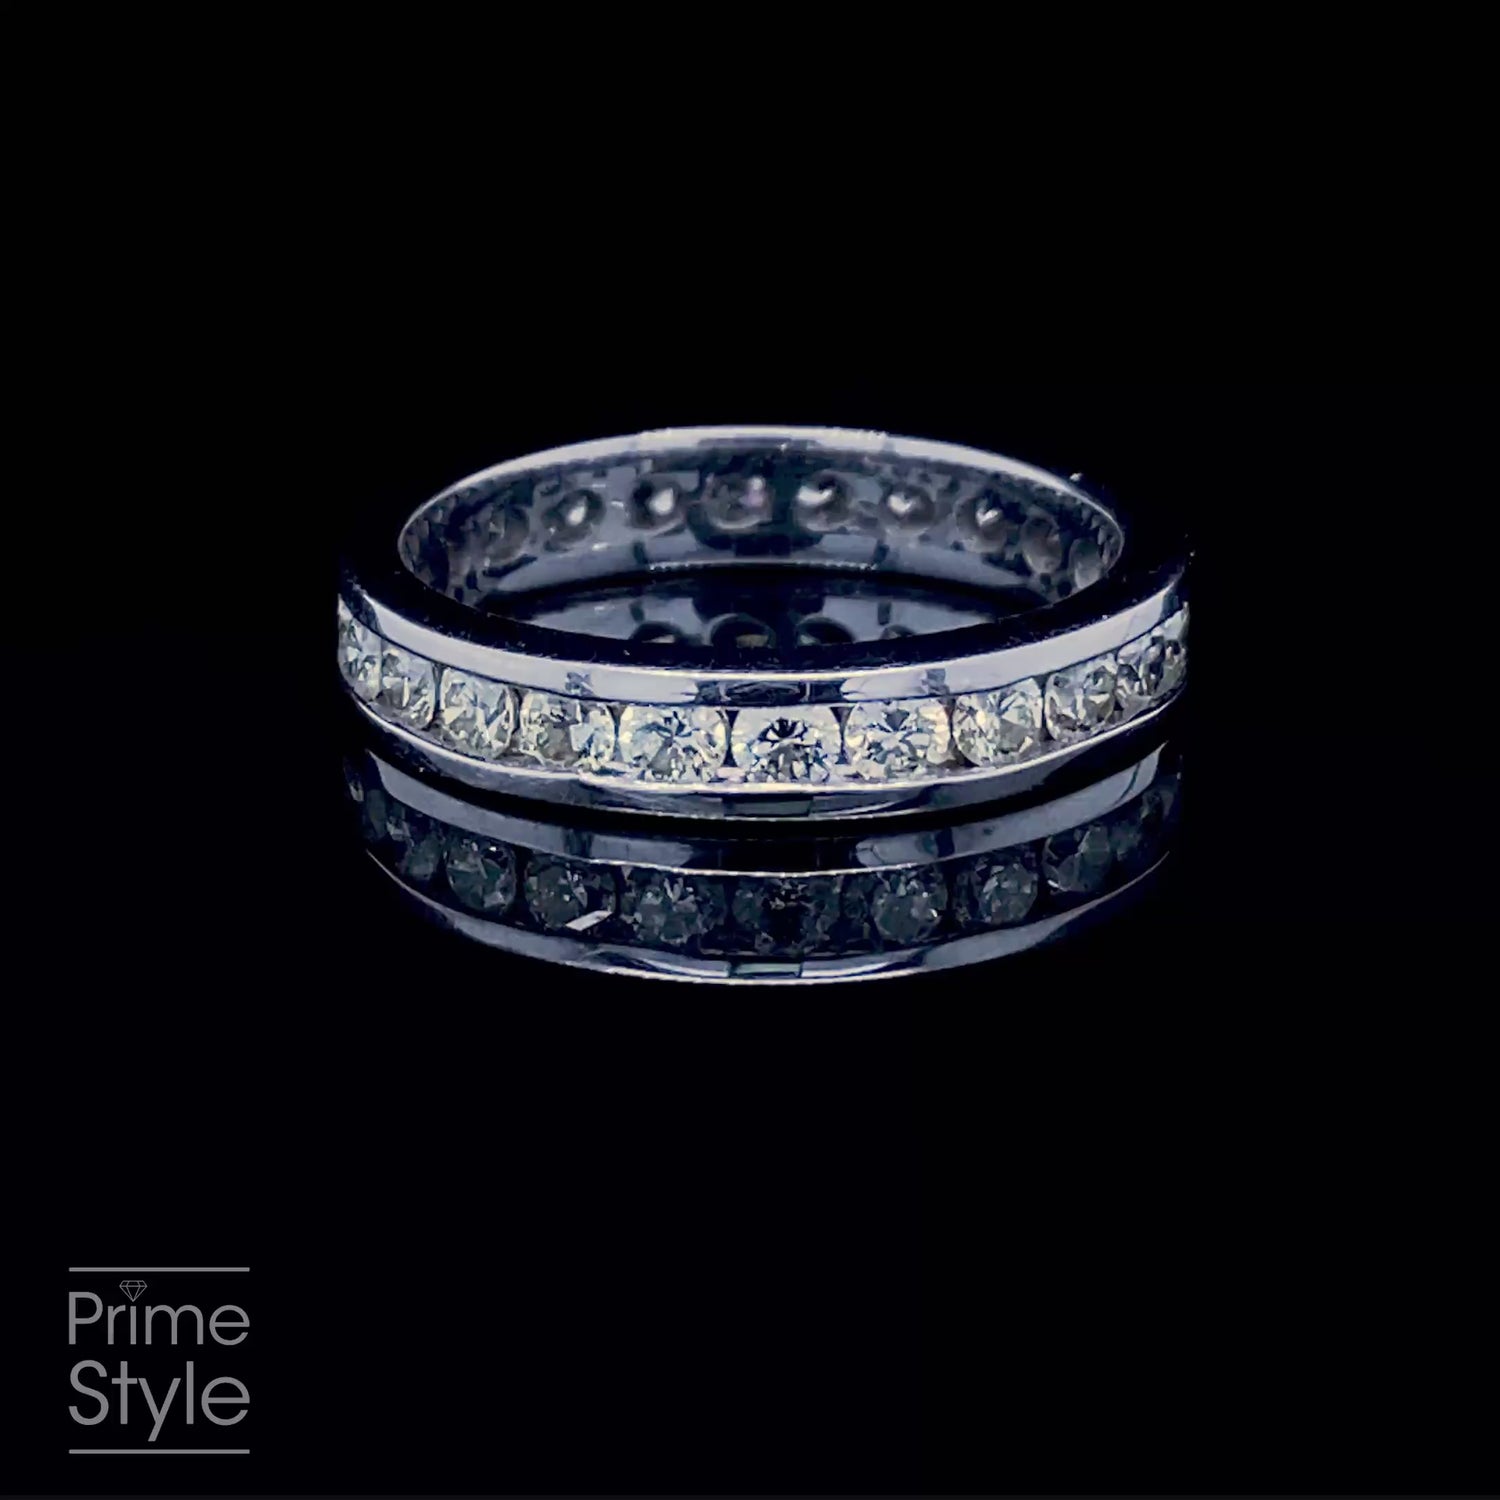 Special 1.00CT Round Cut Diamond Eternity Ring in 14KT White Gold